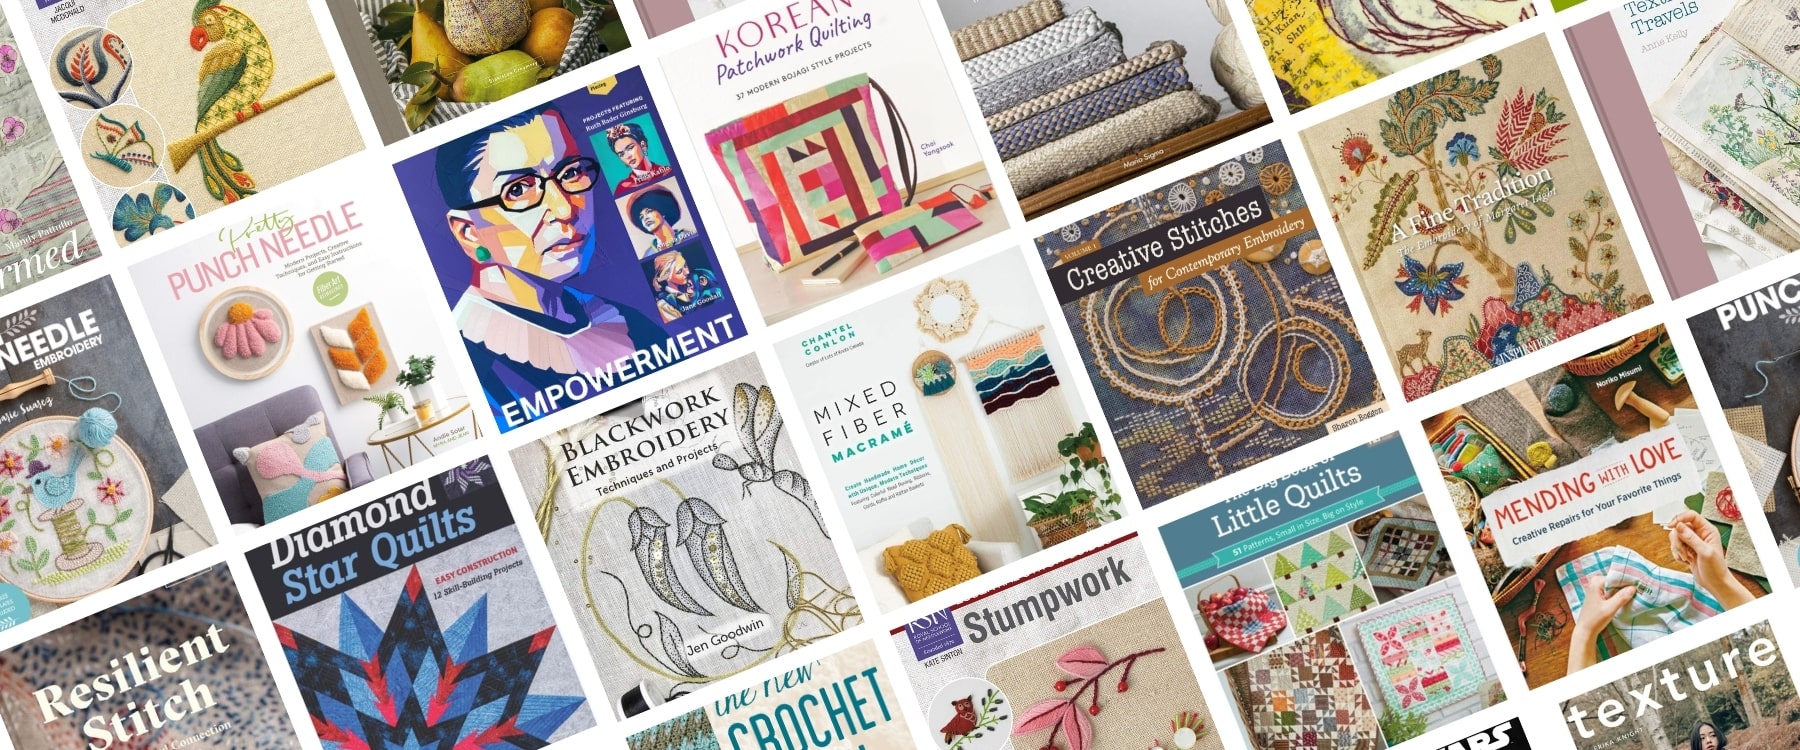 24 of the Latest Textile Books for Stitch Enthusiasts